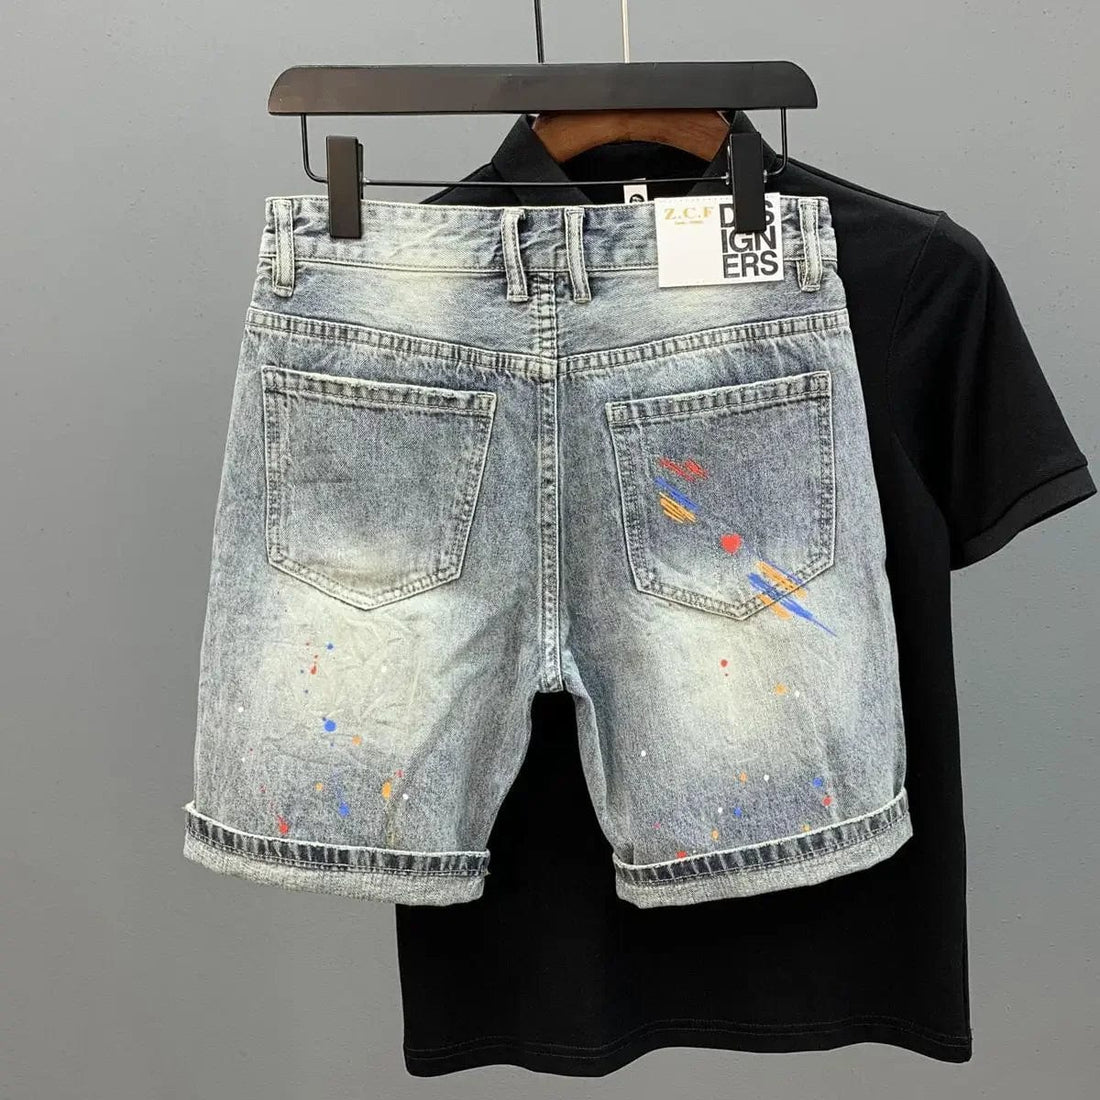 A pair of Unique Kulture Claw Monkey Designer Jean Shorts displayed against a plain background. The shorts are made from high-quality denim, featuring a stylish distressed look with intricate stitching. A unique claw monkey graphic is prominently displayed, adding a bold and playful touch. The shorts have a modern, tailored fit with front and back pockets, and a button and zip closure.